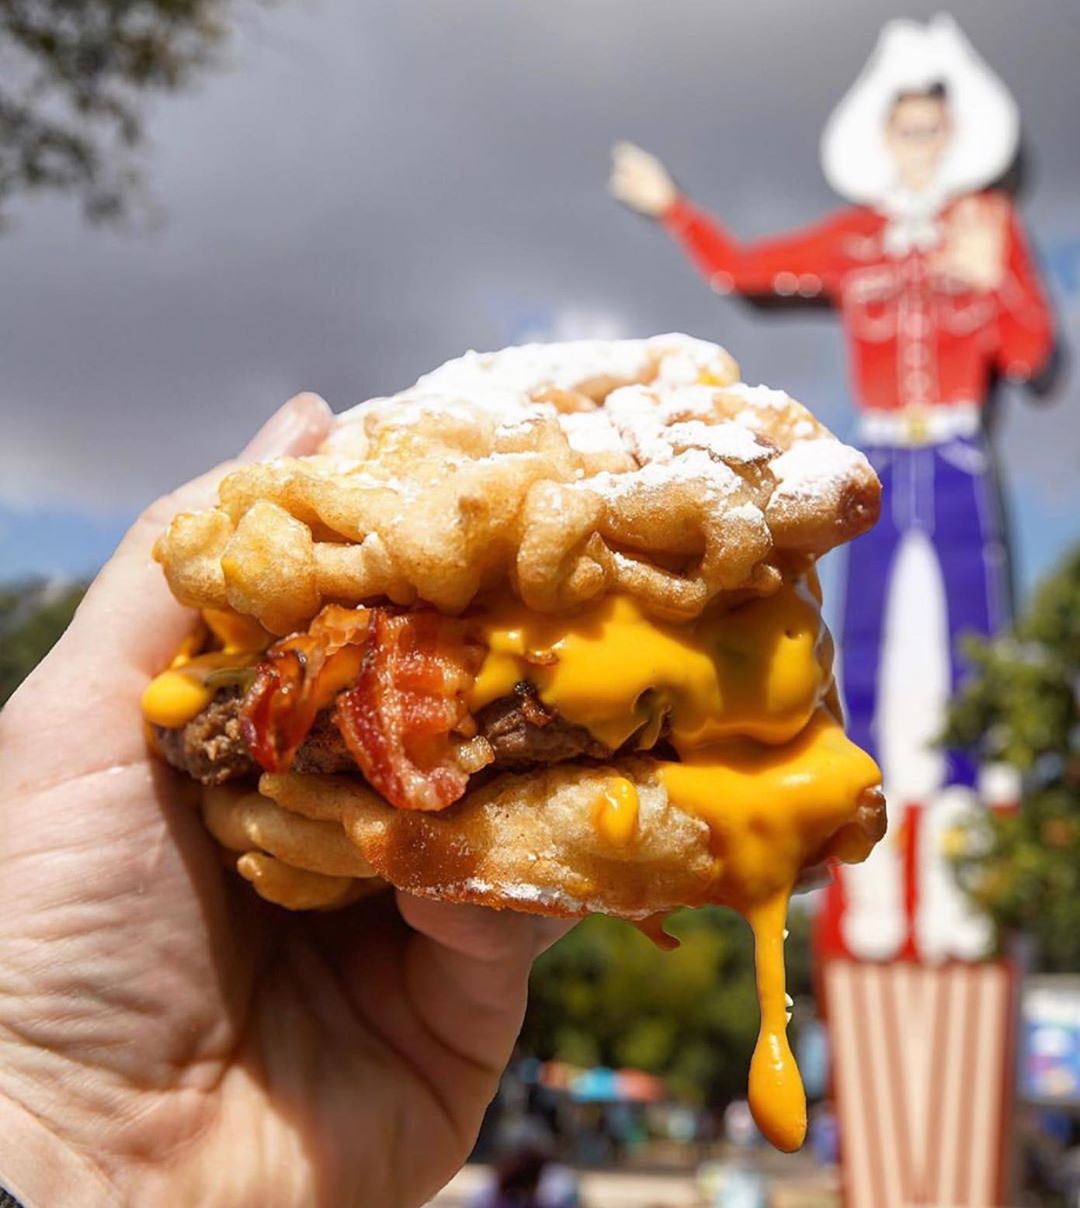 90% chance of rain this weekend and 90% chance we are wishing we were chowin’ down on this right now. 🤤😋🤠 Neon #BigTex #FunnelCakeBaconQuesoBurger #Repost 📸: @taylorwelden